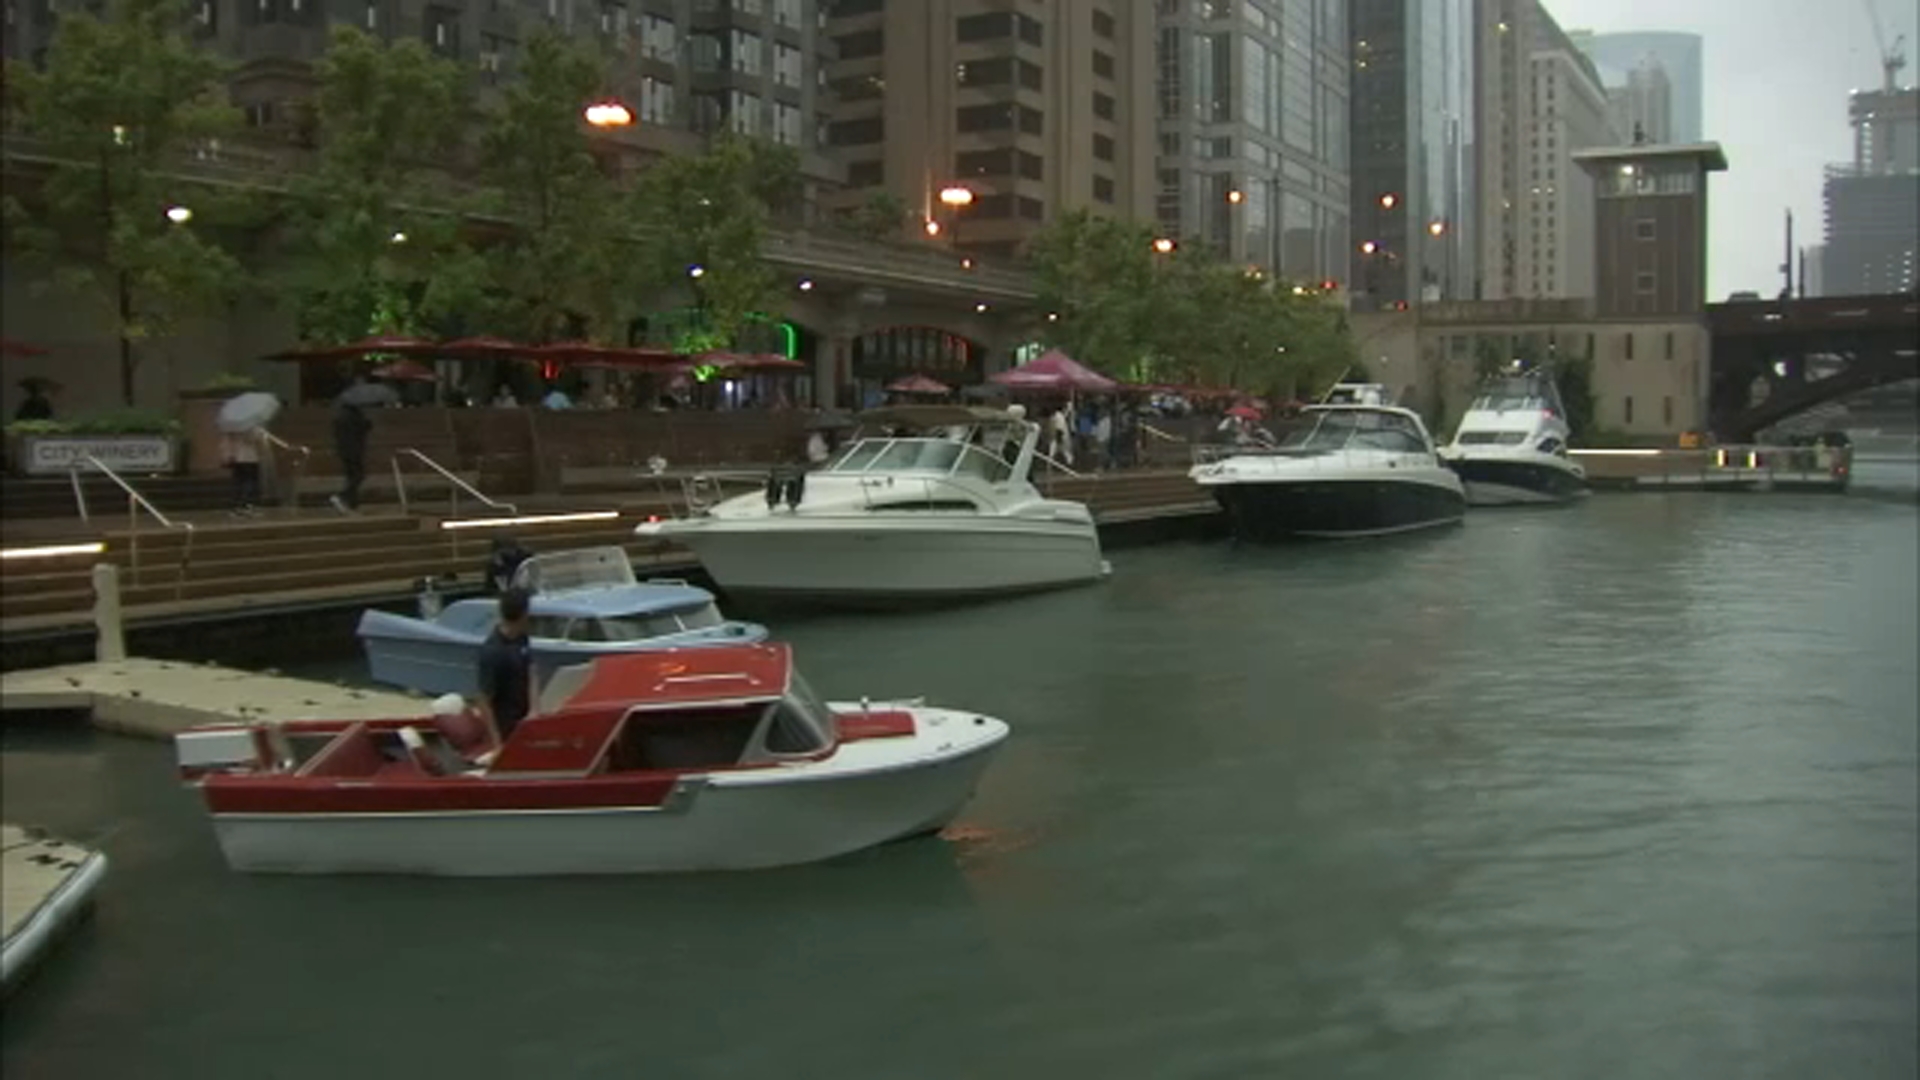 Nights' transform Chicago's Riverwalk as part of timehonored